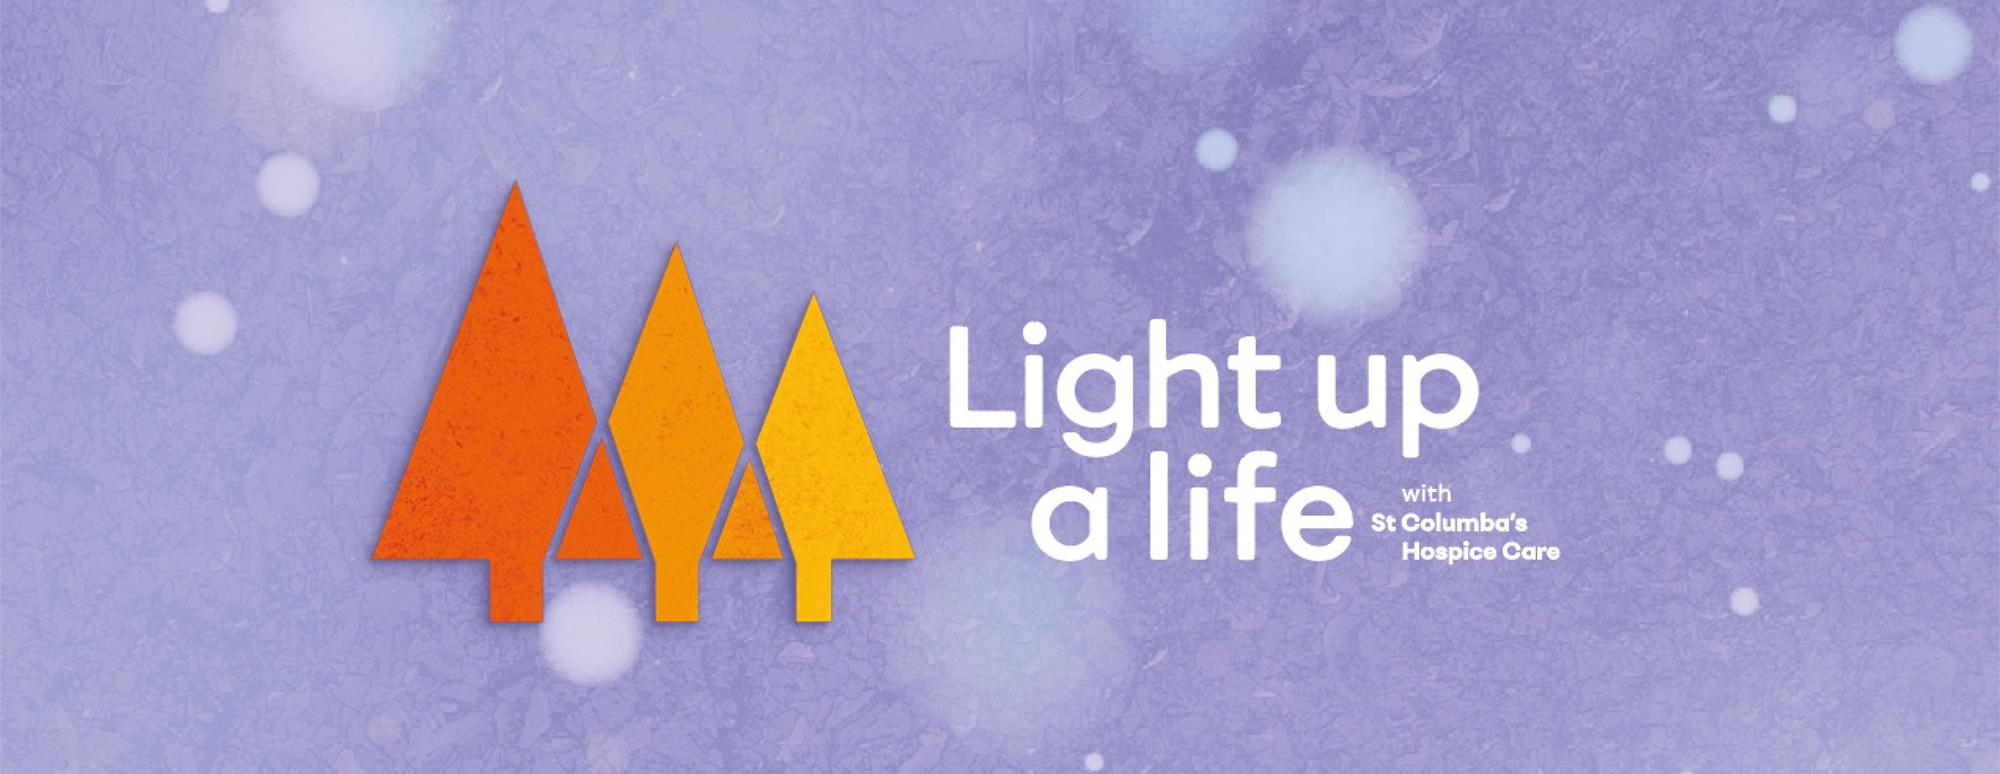 Light Up A Life 2021 Christmas Appeal image